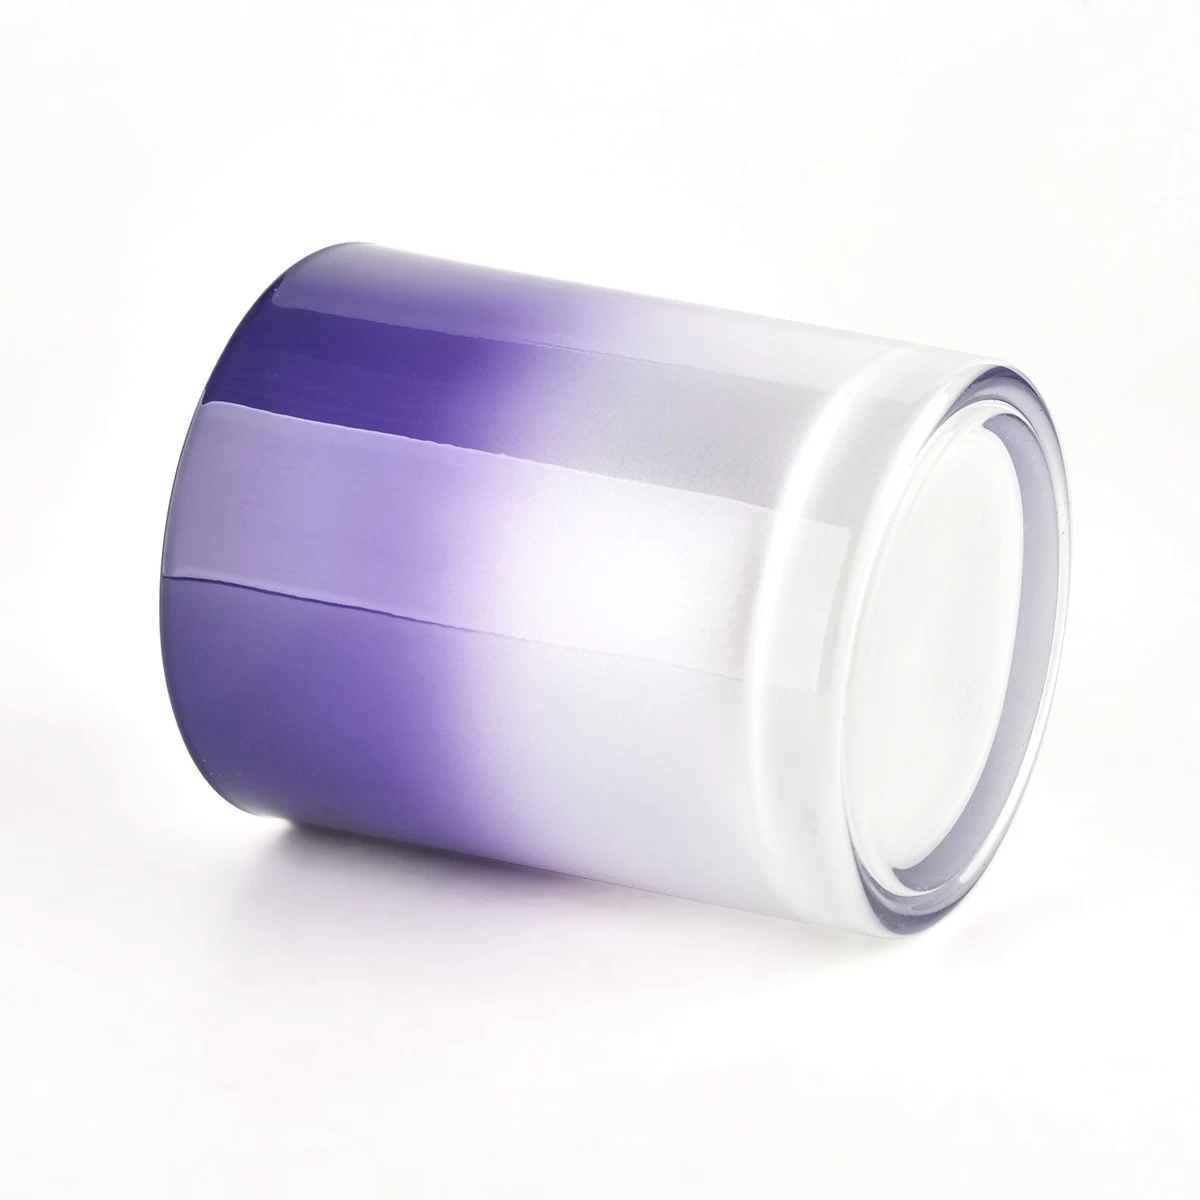 New design glossy glass candle jar with gradient purple supplier - COPY - uc7ruv